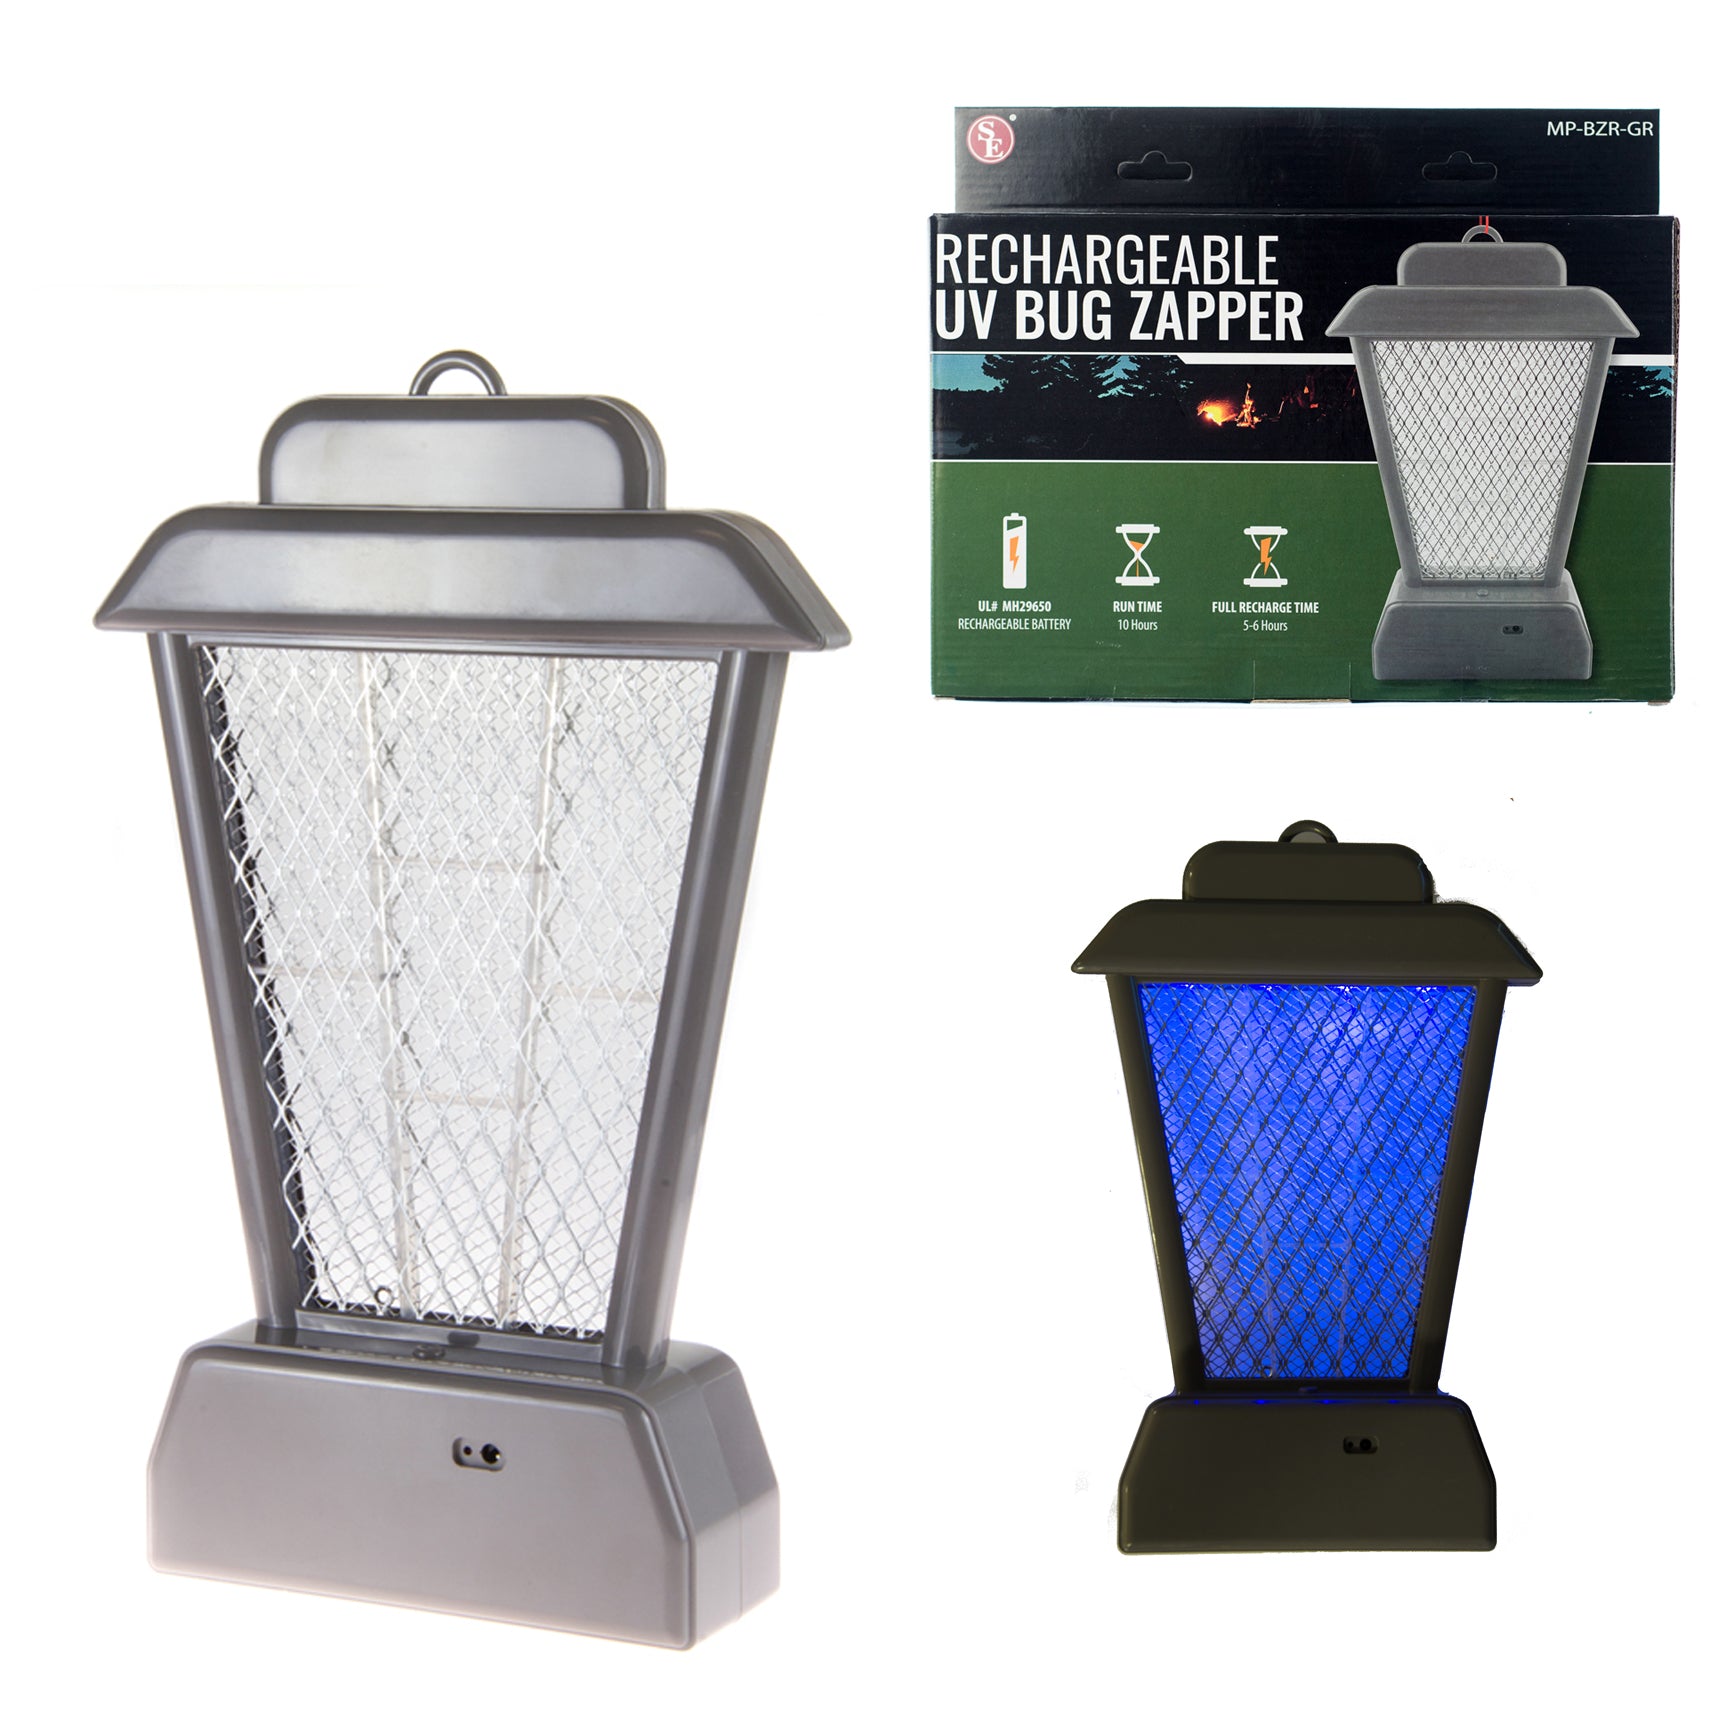 Rechargeable UV Bug Zapper (1 pc)